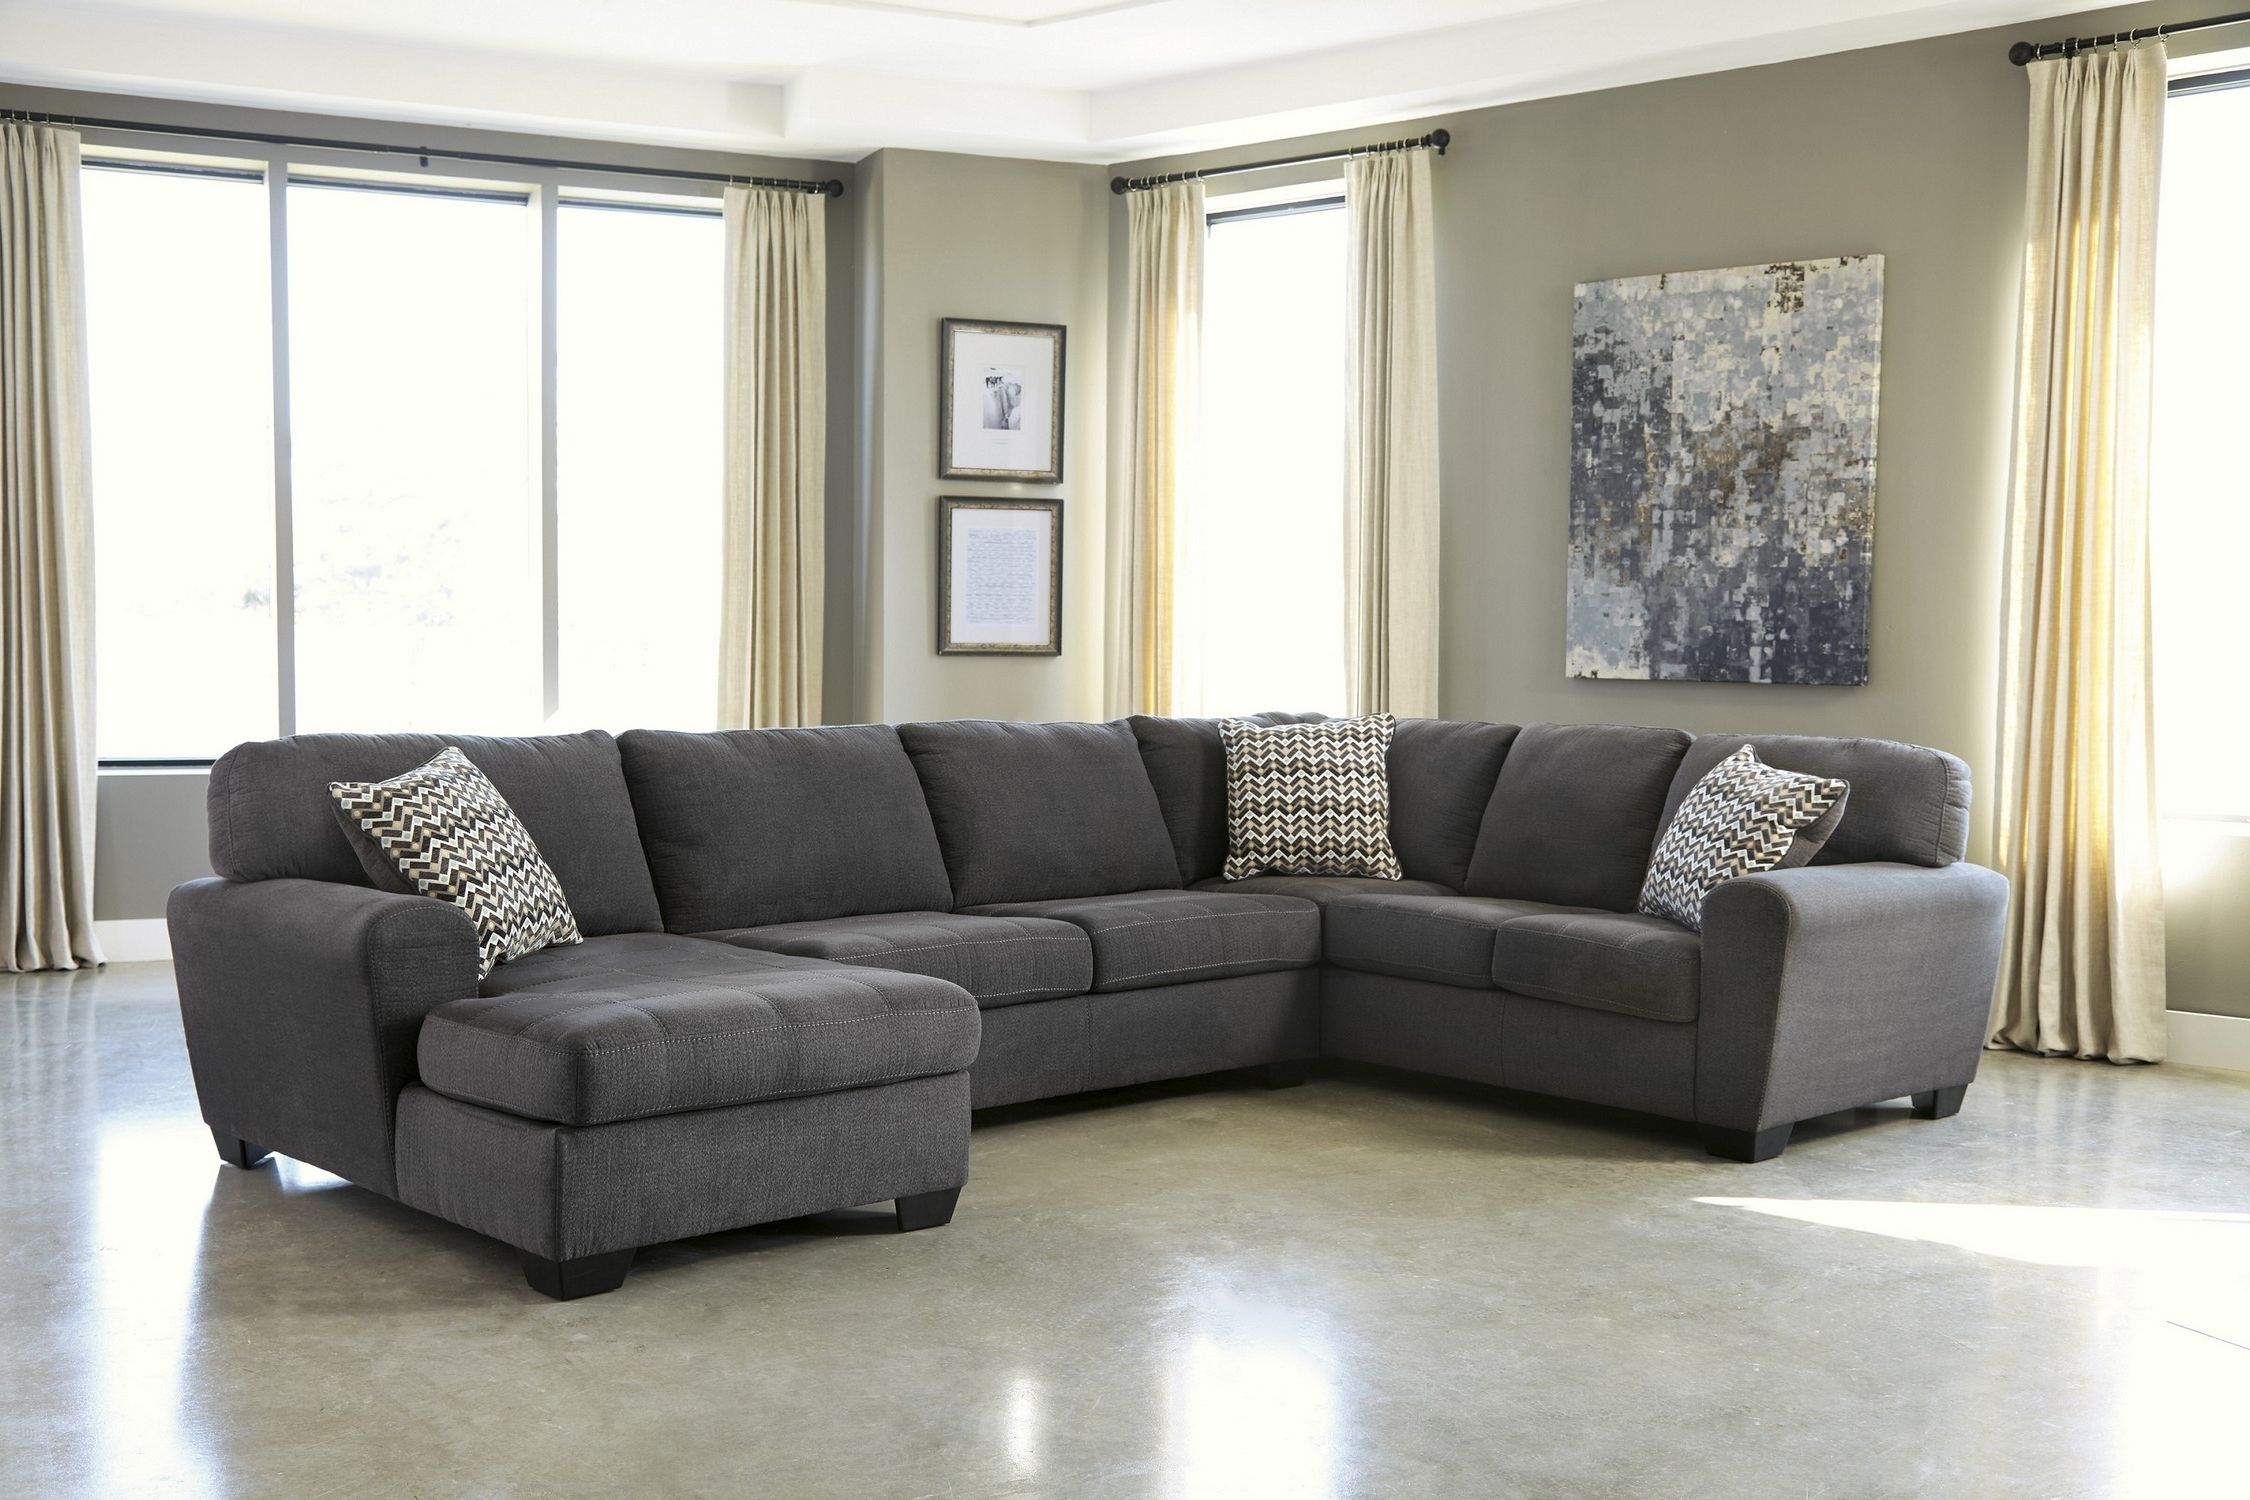 2018 Alenya 3 Piece Sectional Quartz Fabric Reclining Sectional Grey Regarding Charcoal Sectionals With Chaise (View 1 of 15)